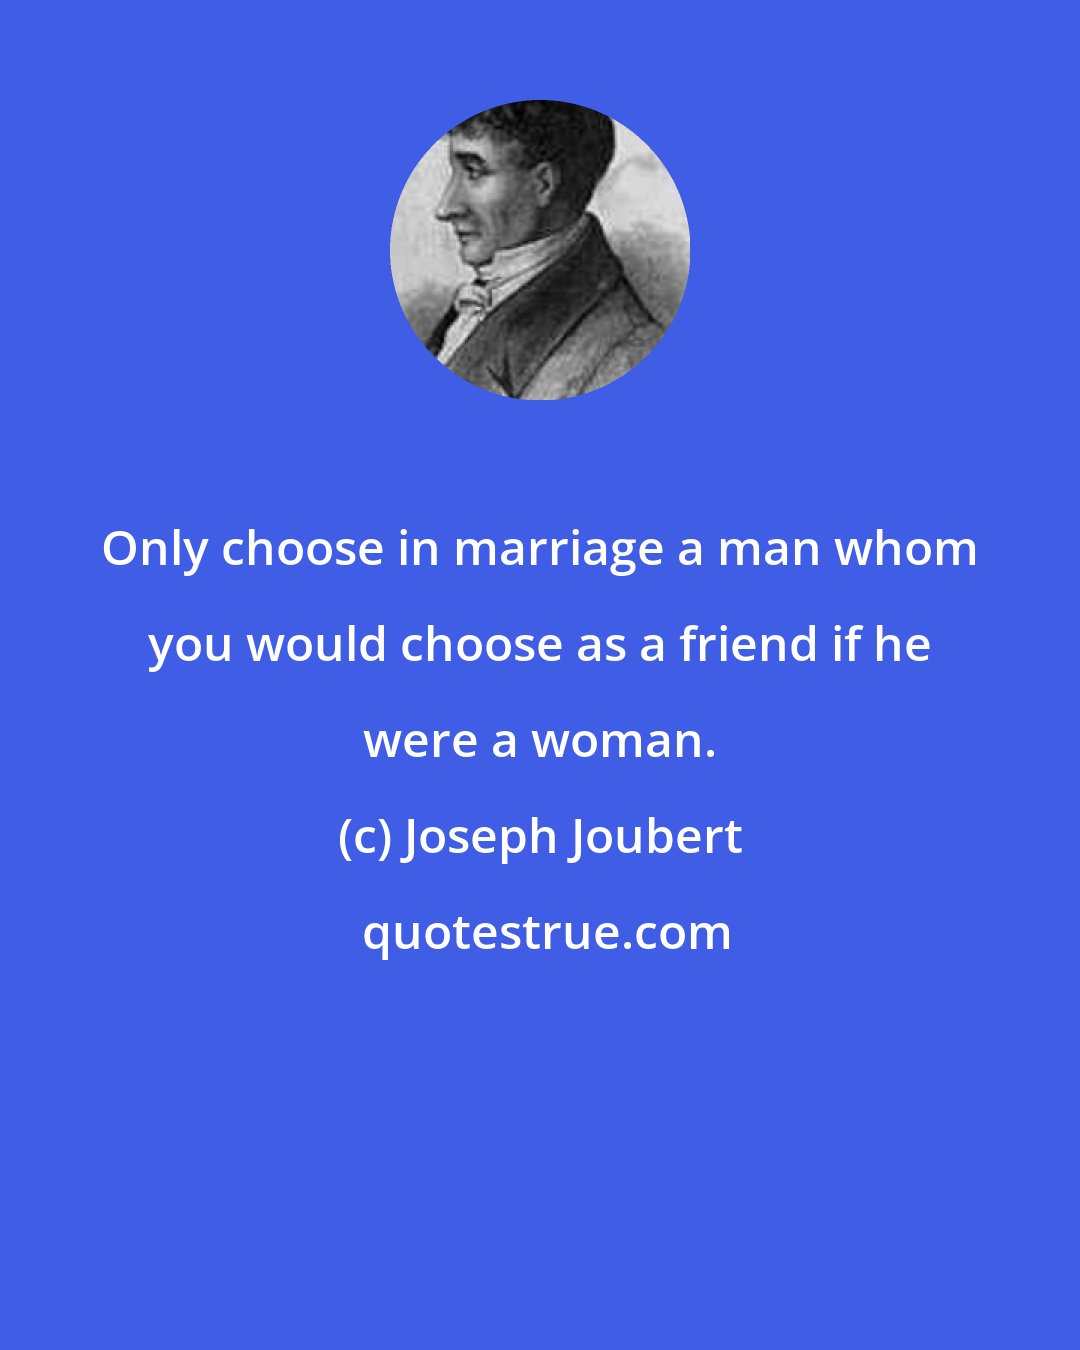 Joseph Joubert: Only choose in marriage a man whom you would choose as a friend if he were a woman.